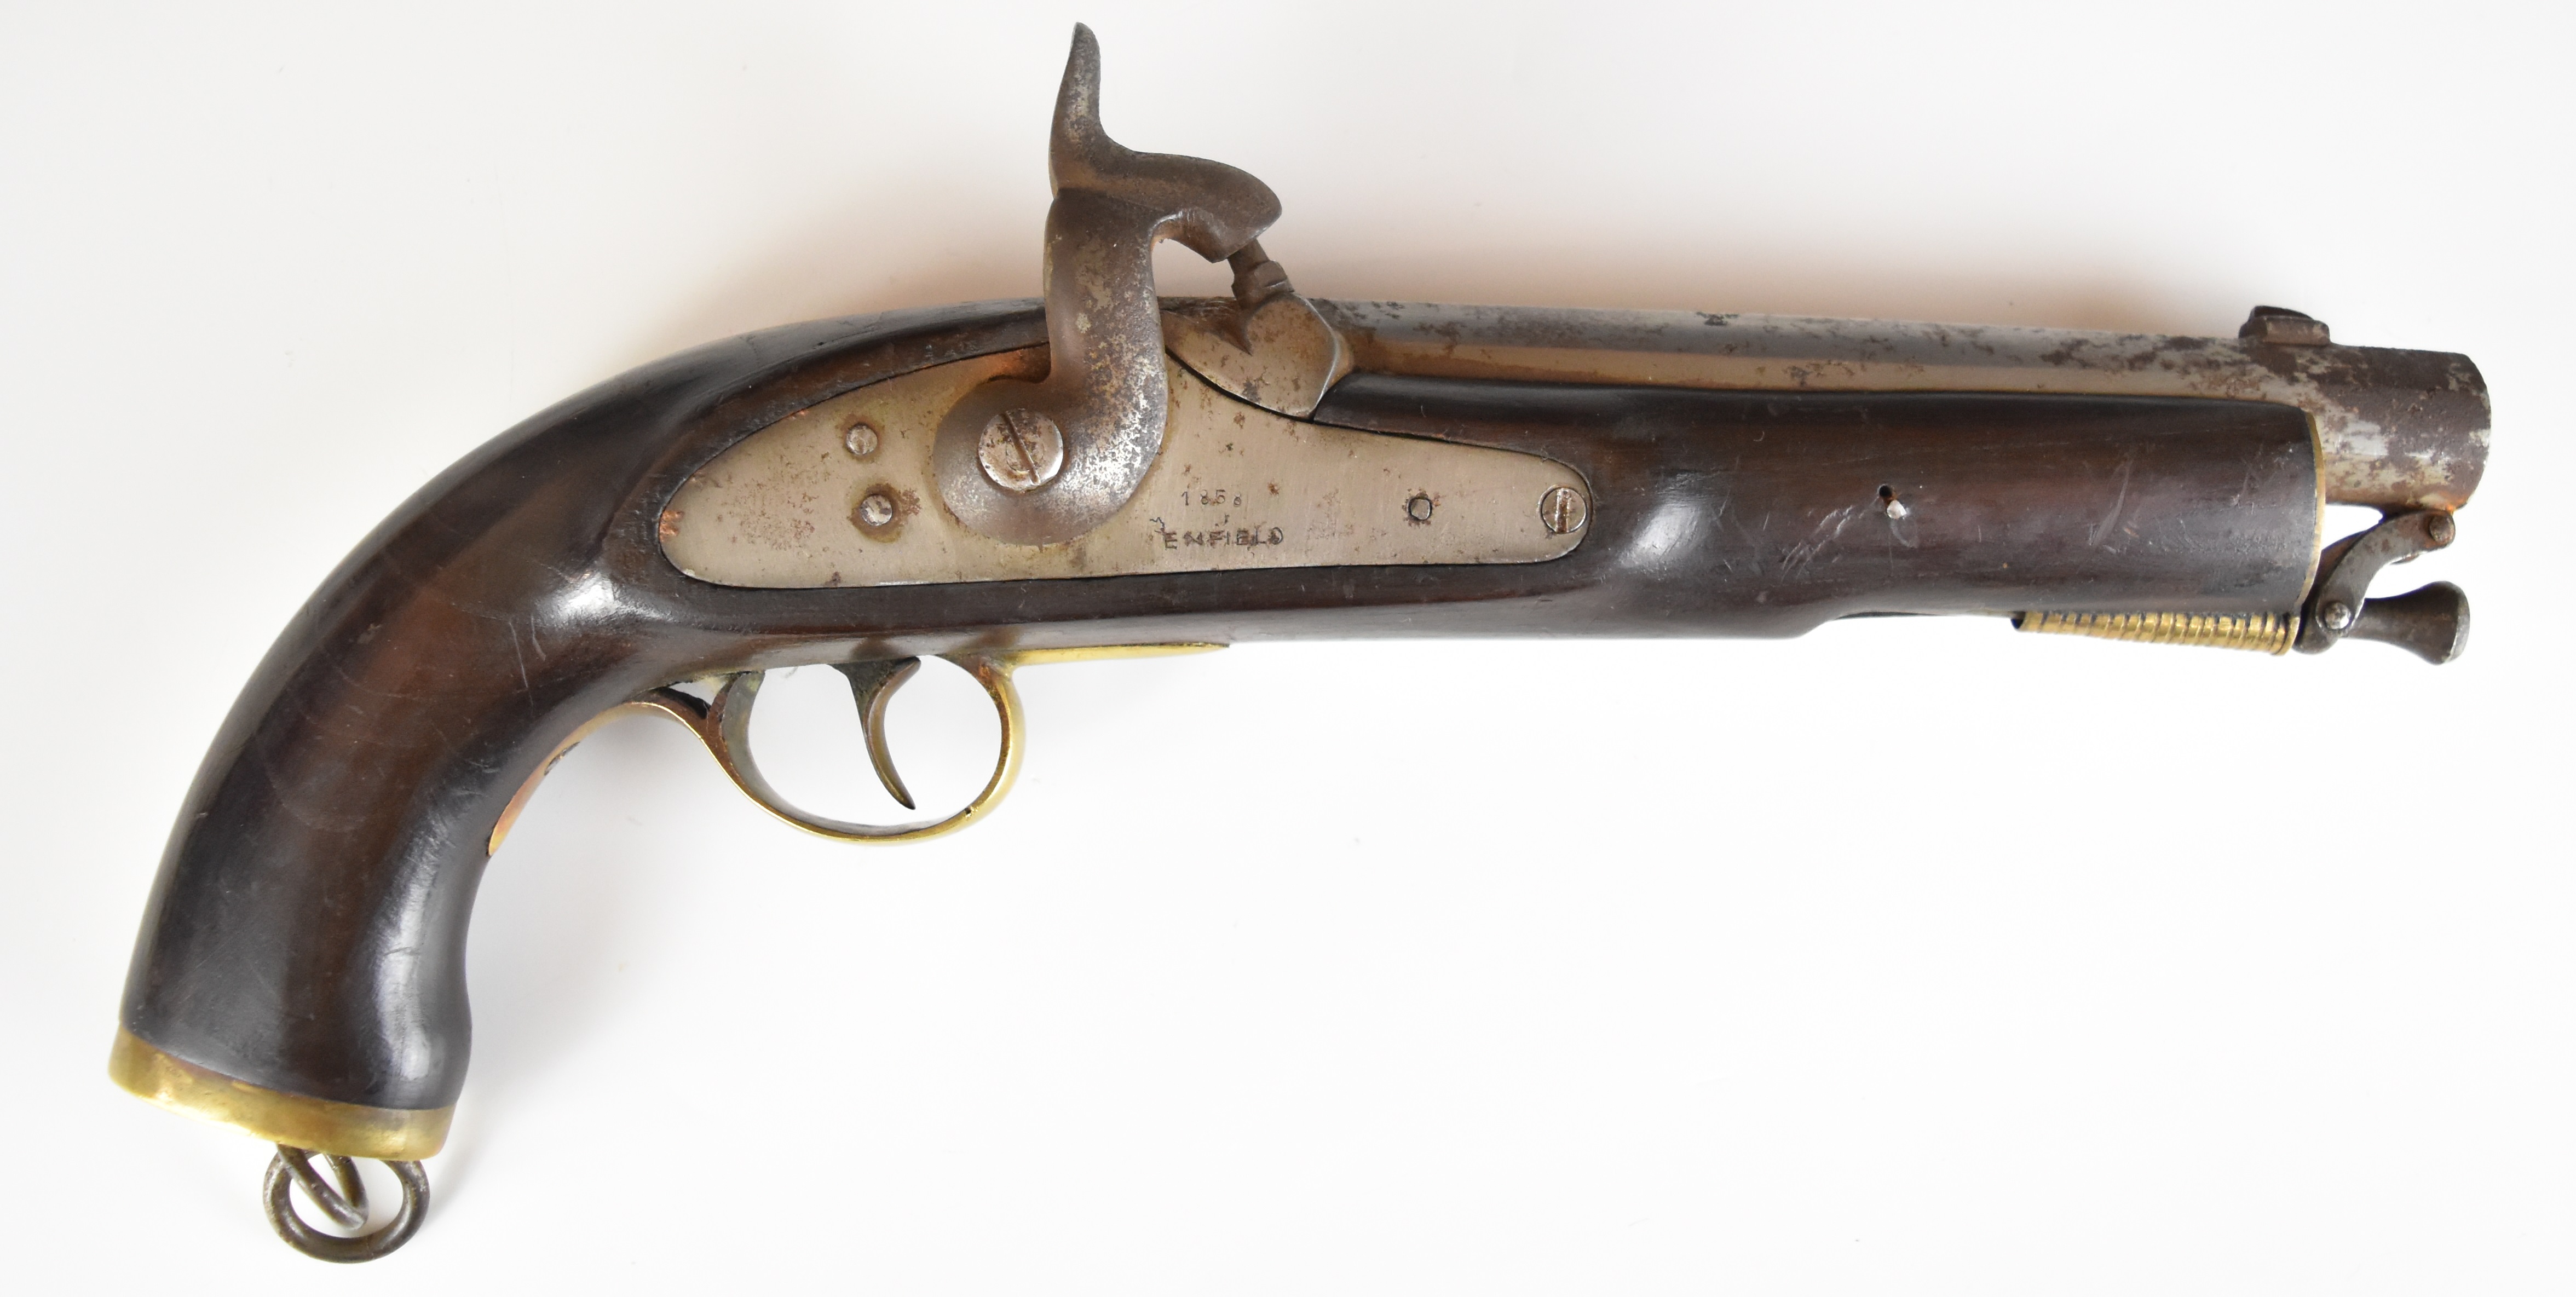 Enfield percussion hammer action sea-service pistol with lock stamped '1858 Enfield' brass trigger